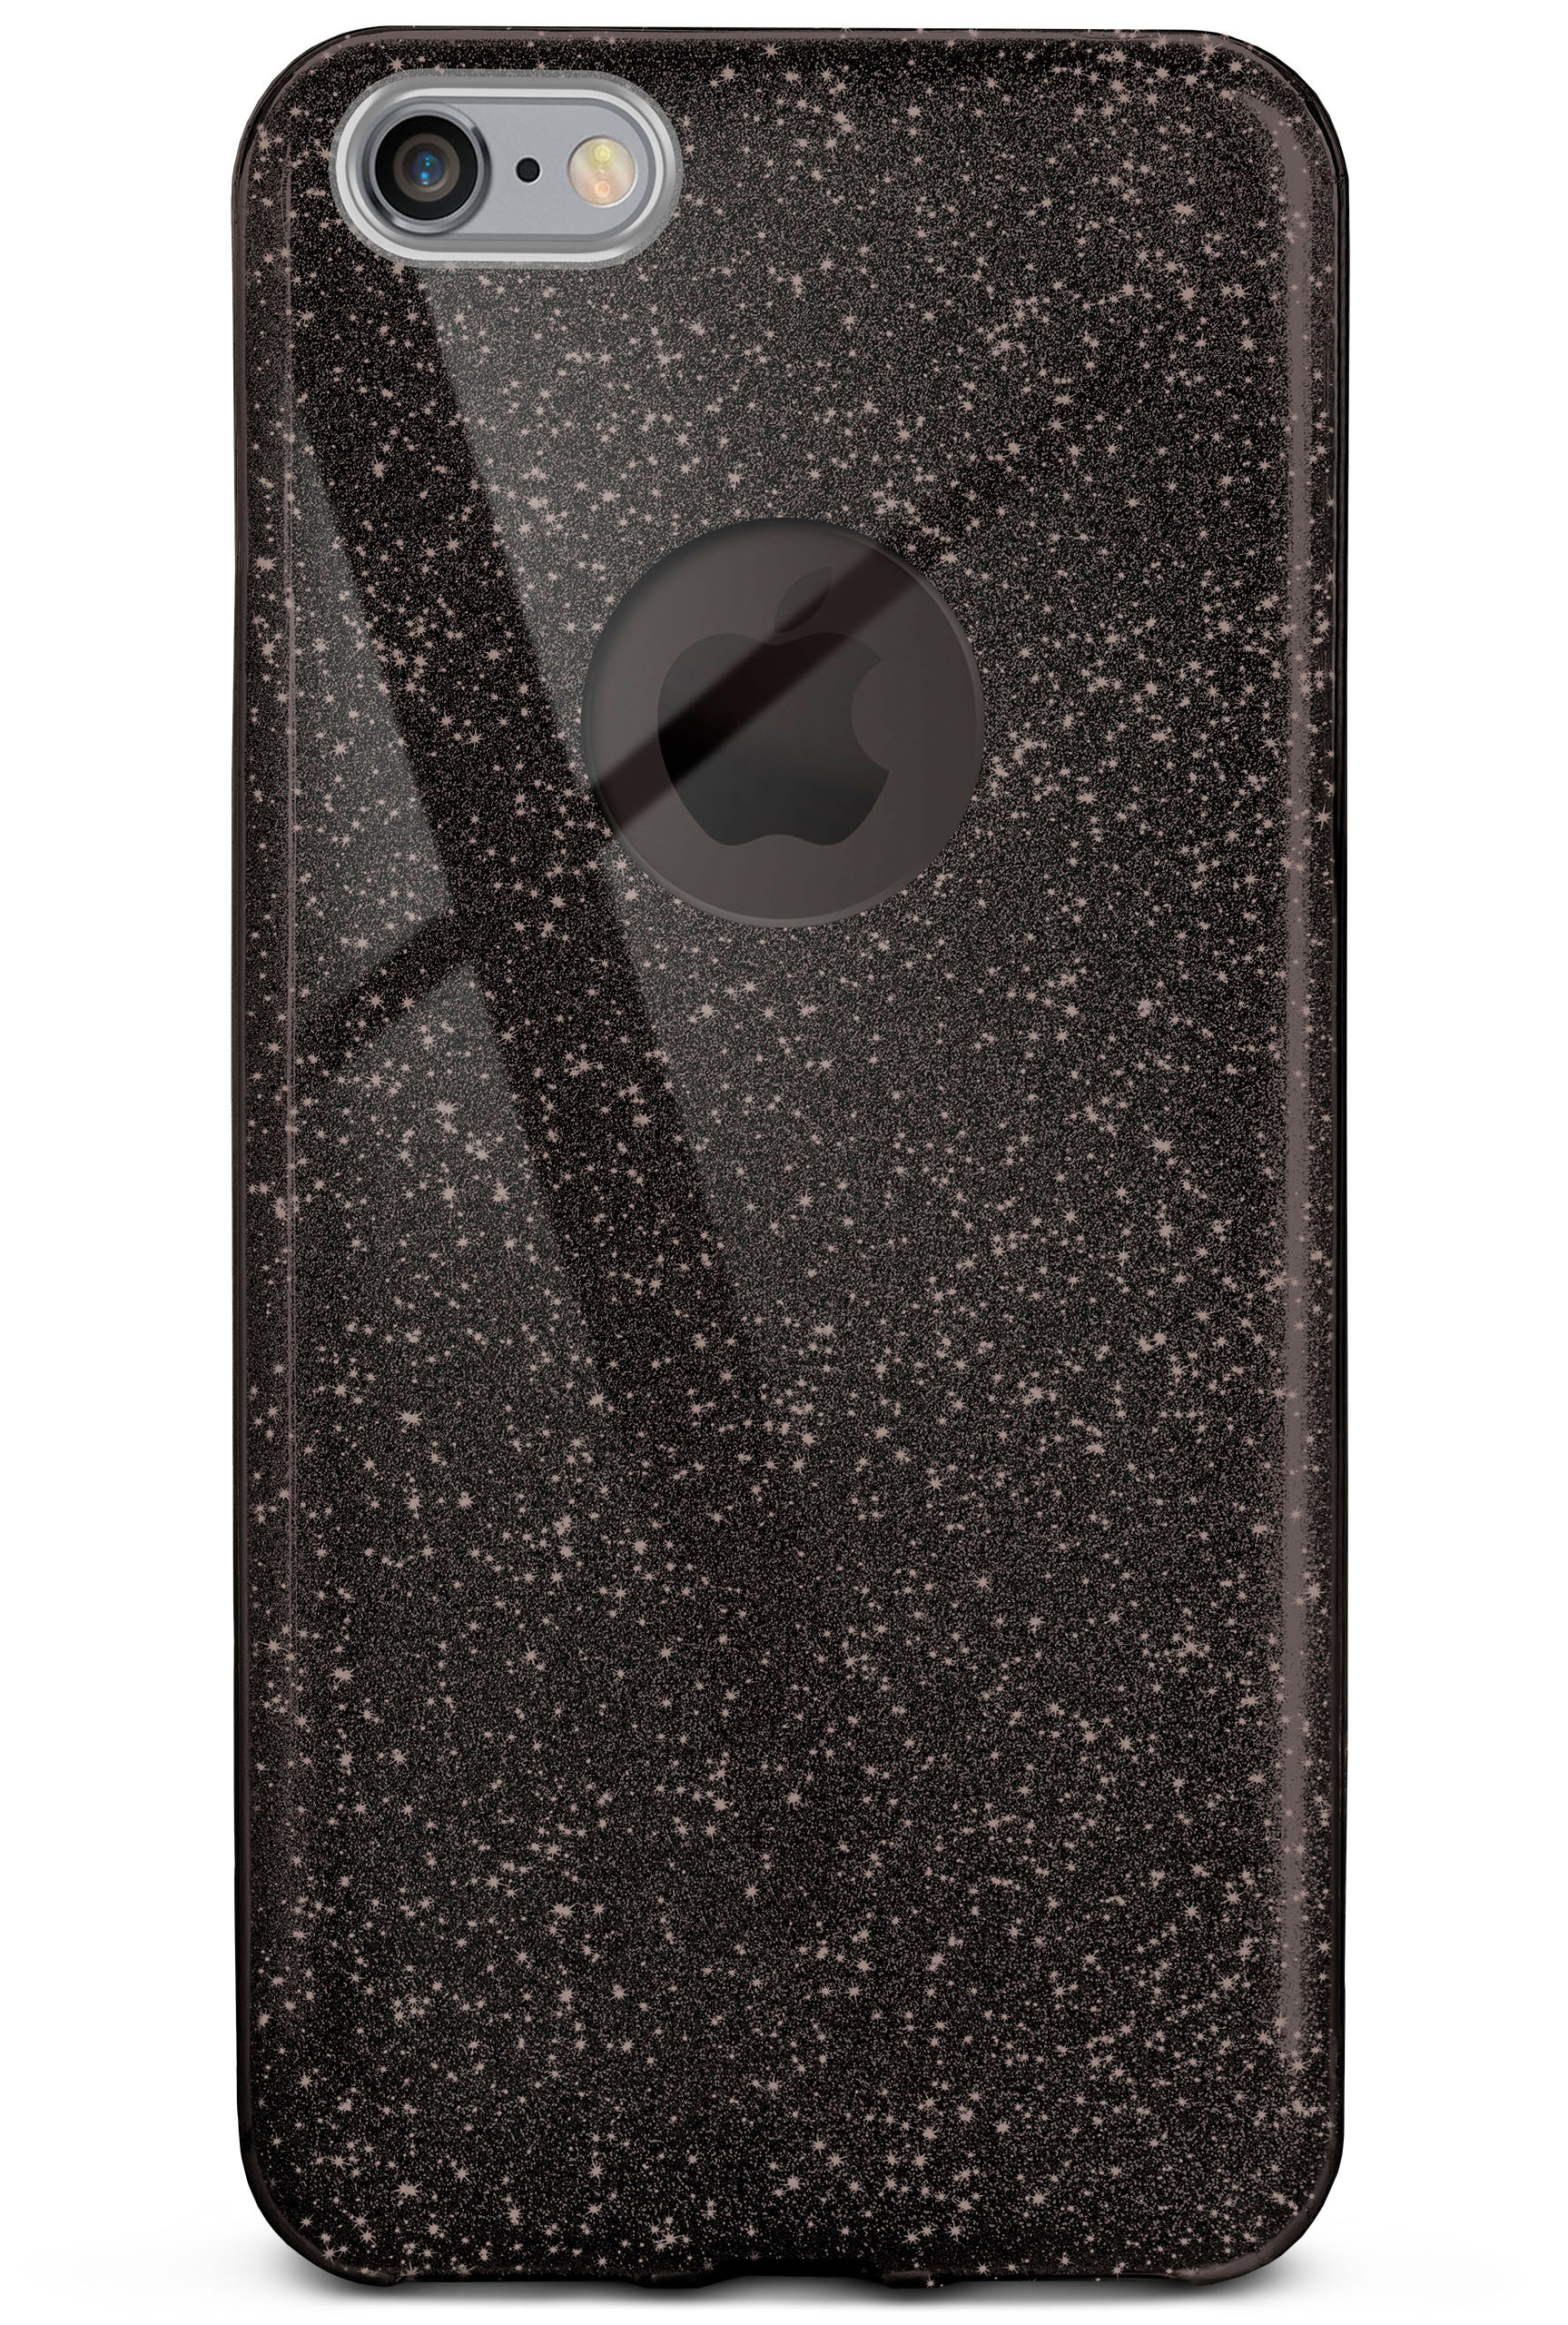 iPhone Case, / Backcover, Apple, - 6, Glitter Glamour Black ONEFLOW 6s iPhone